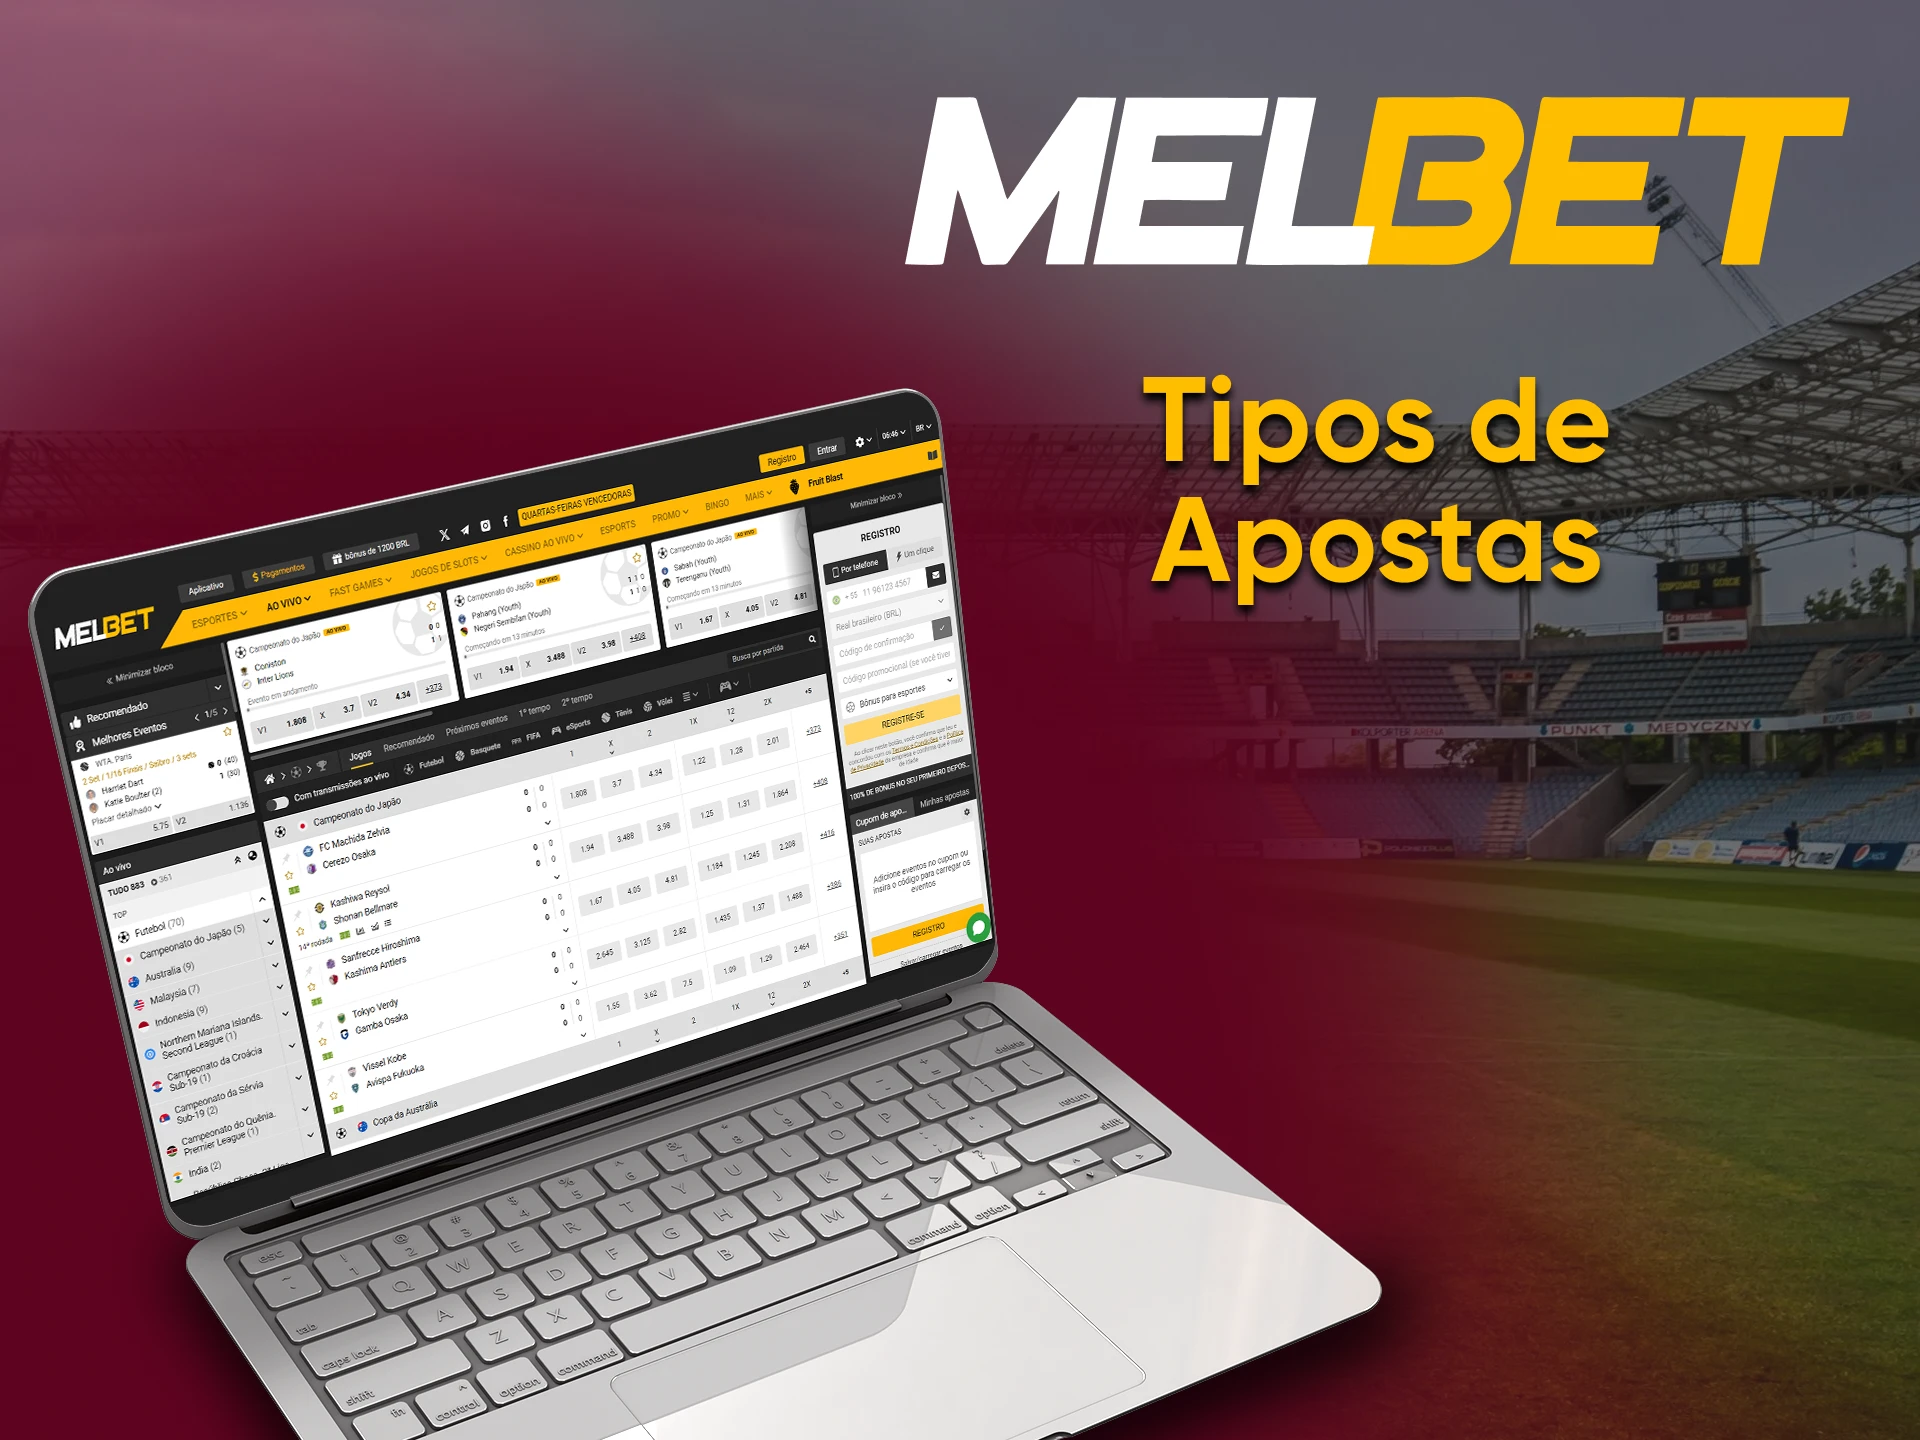 We'll tell you what types of bets are available at Melbet.